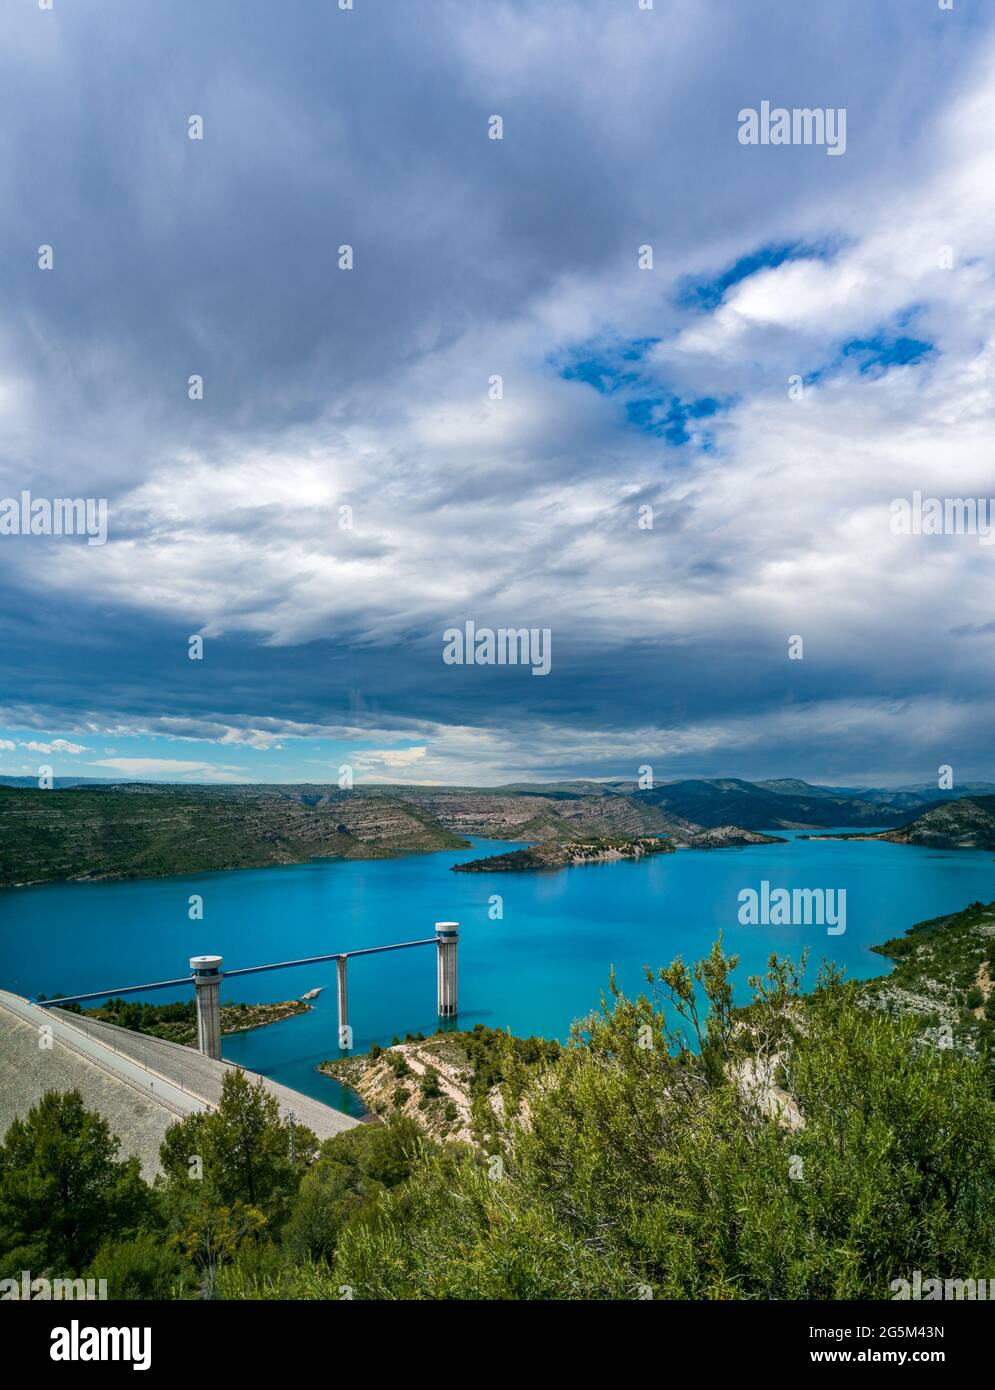 Dam at full capacity under the clouds Stock Photo